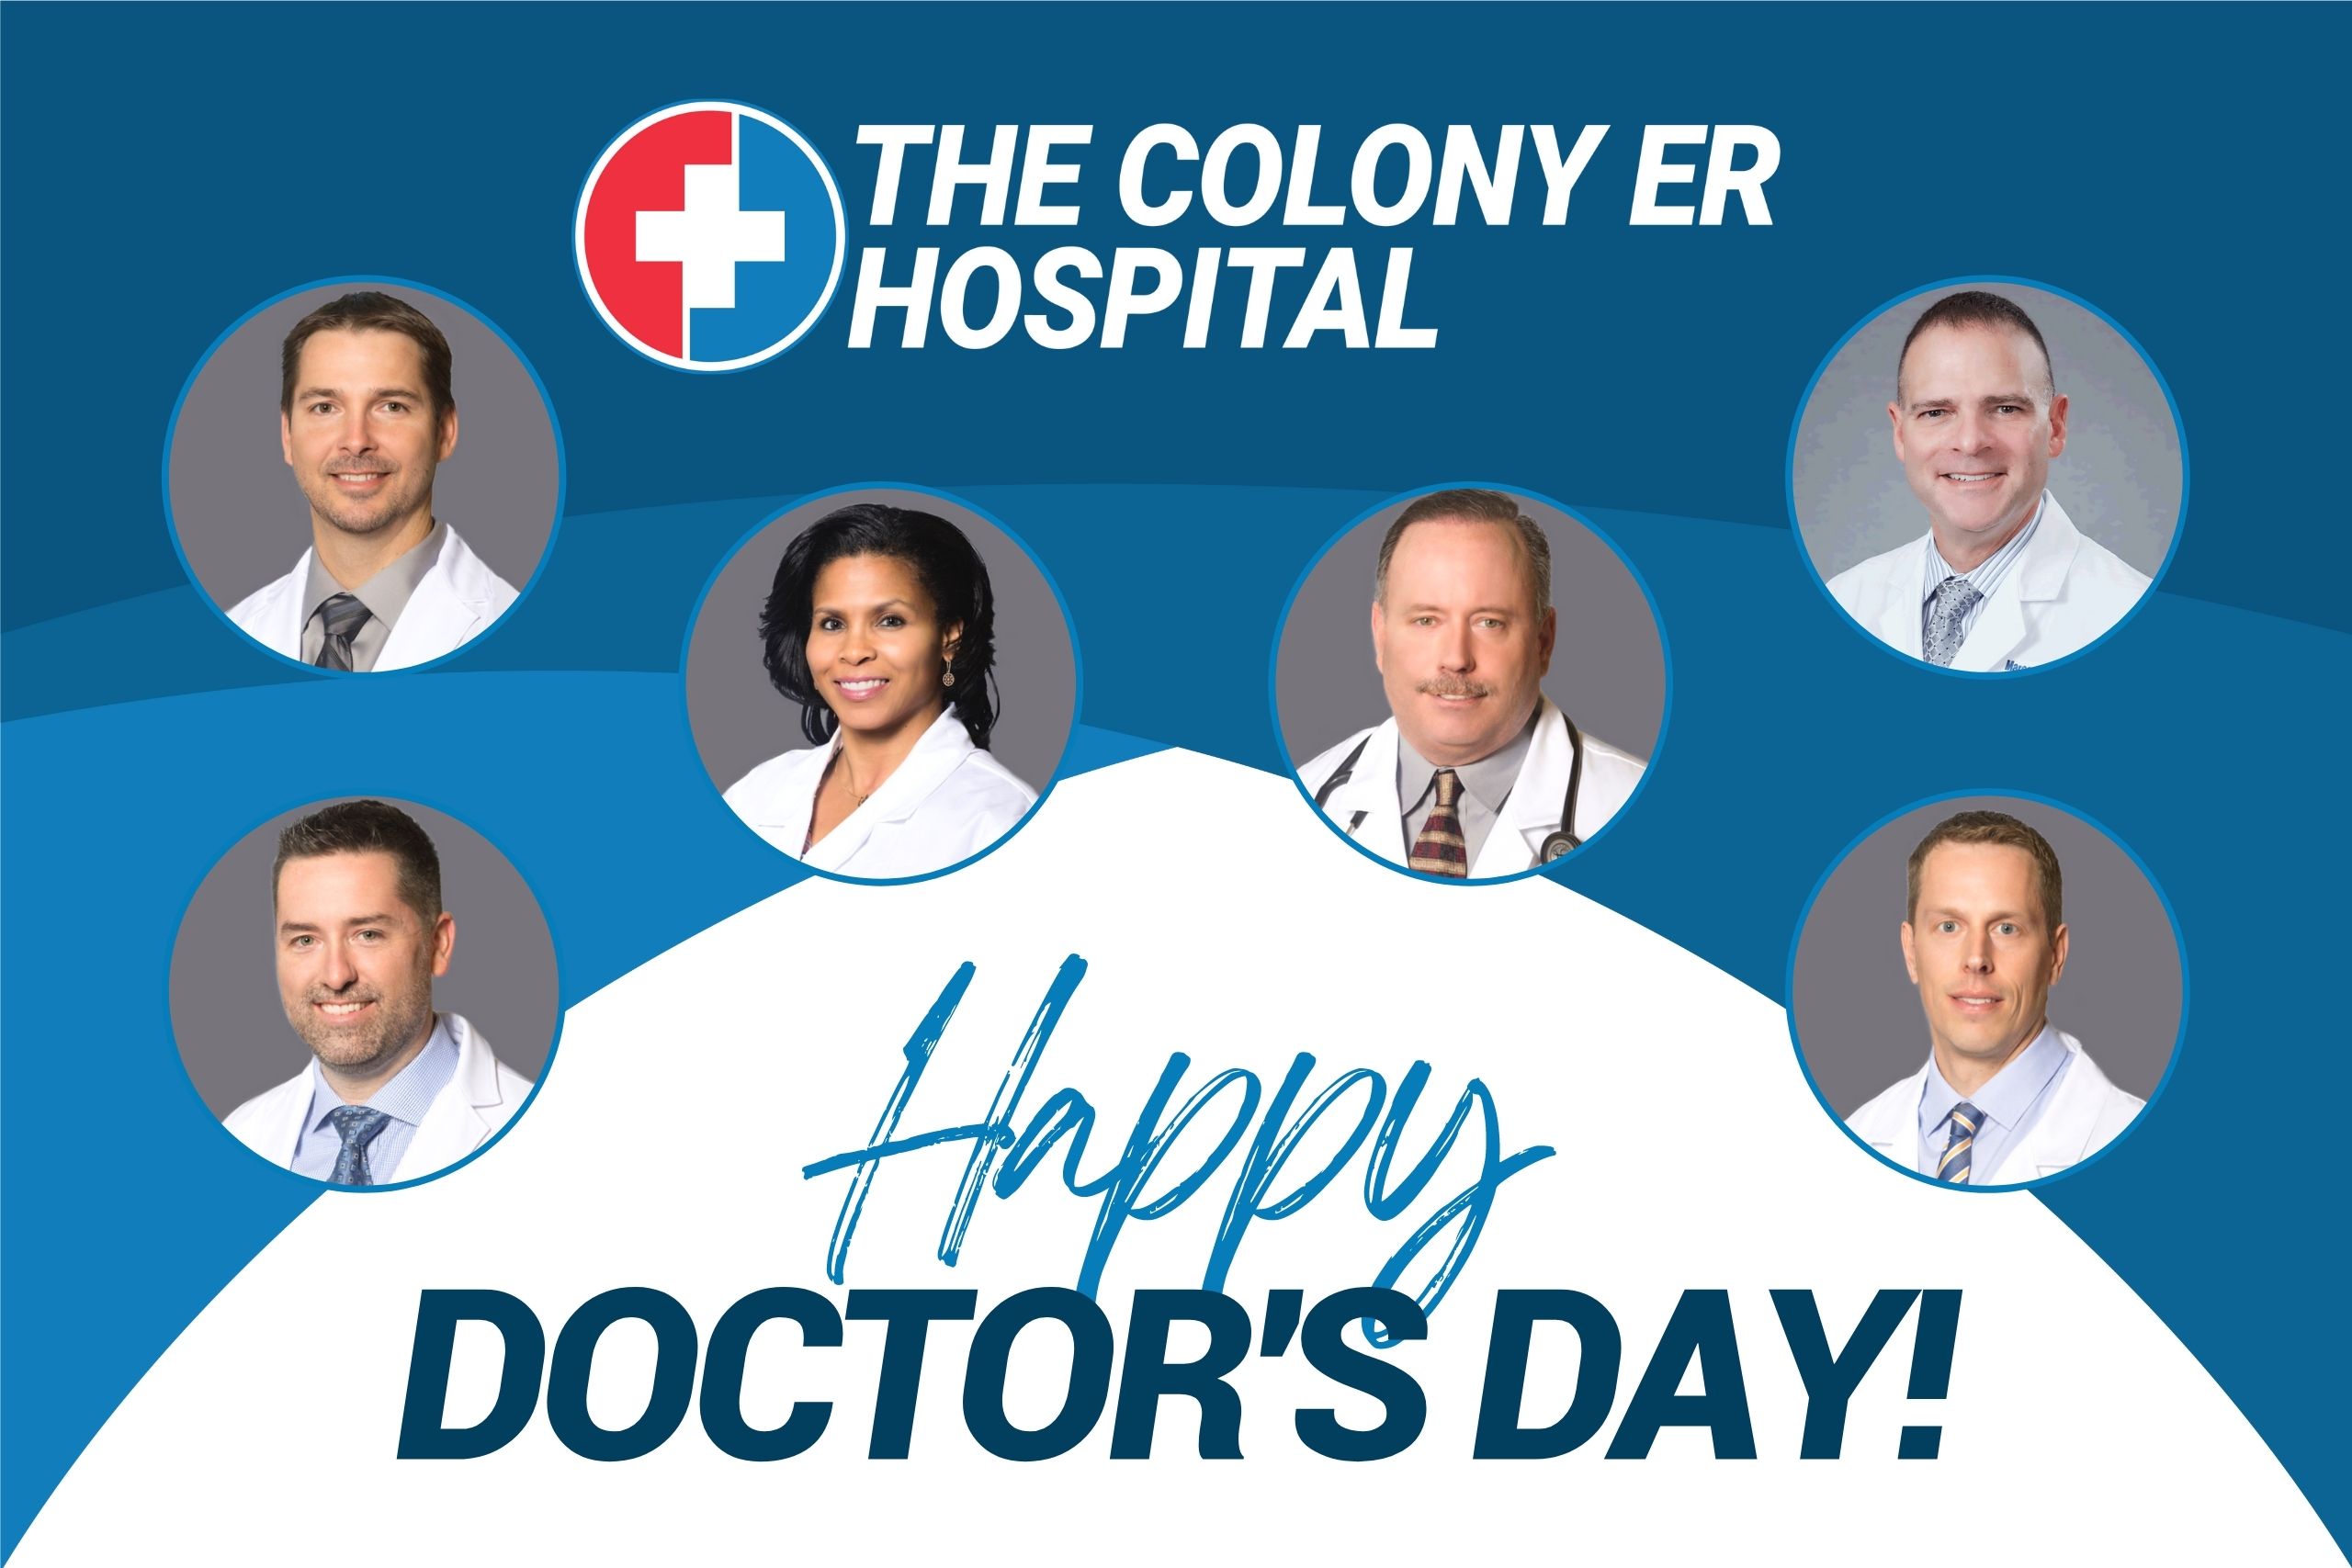 The Colony ER & Hospital Doctors